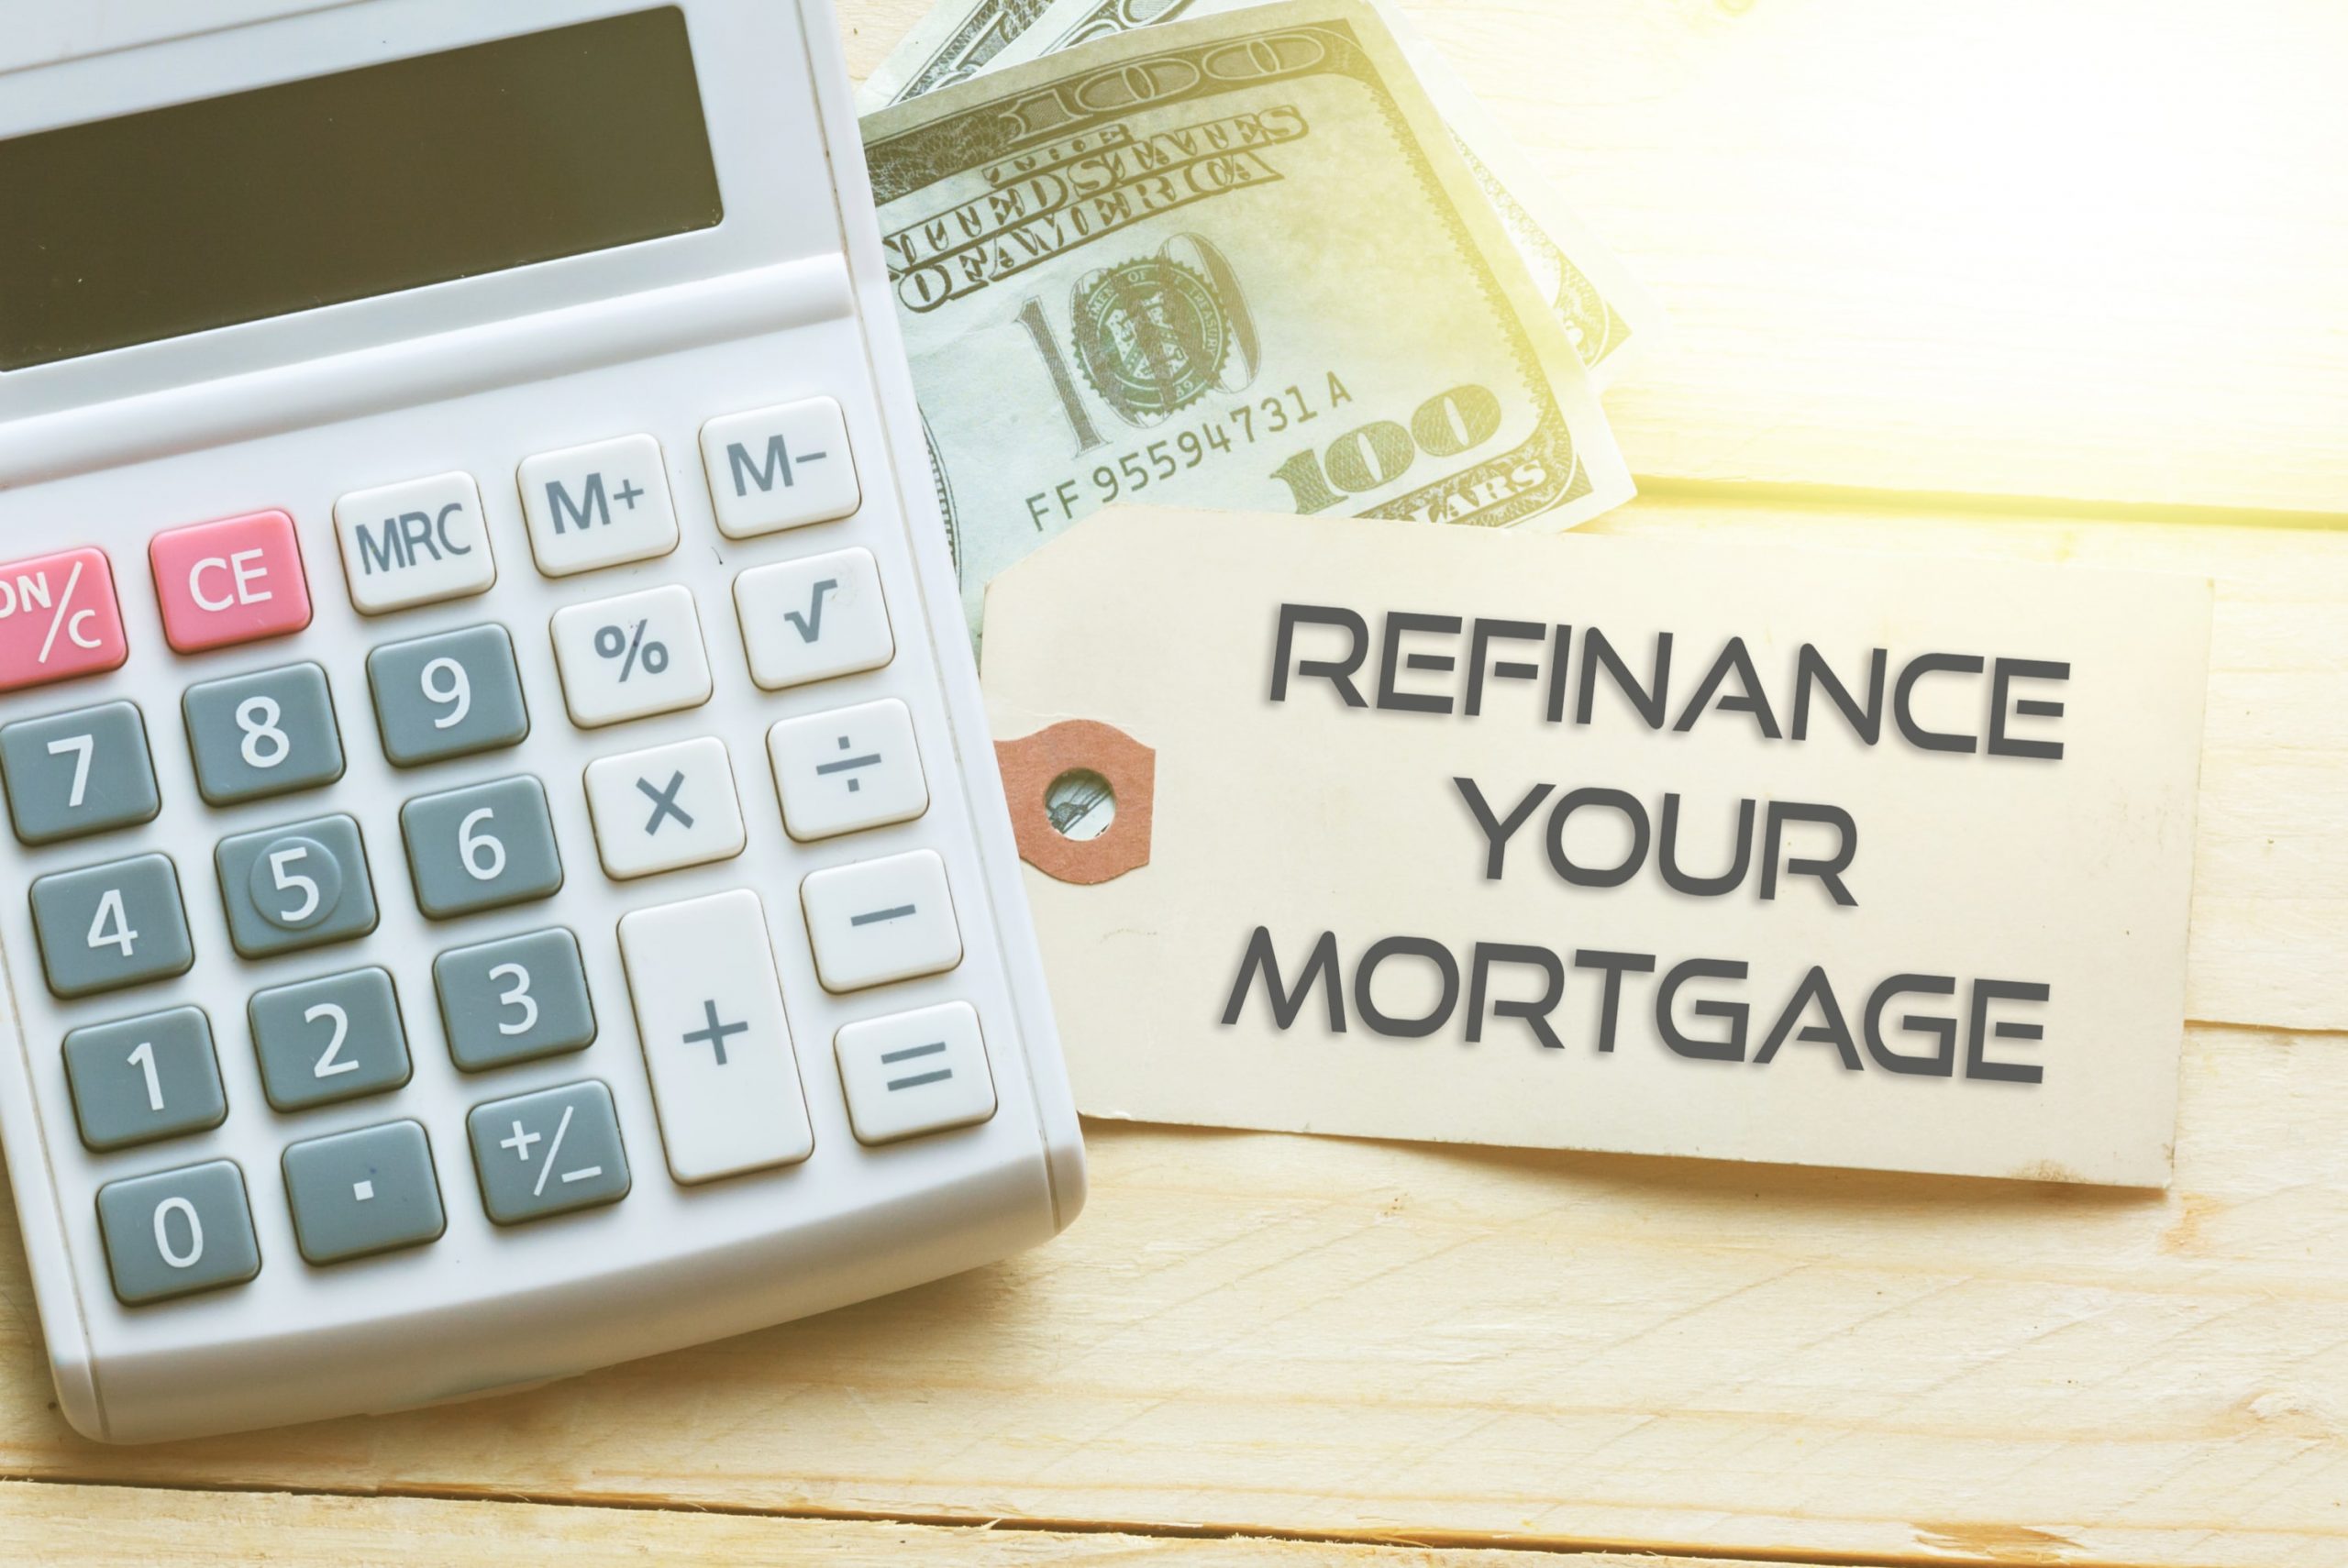 How to Refinance a Mortgage on Your Home